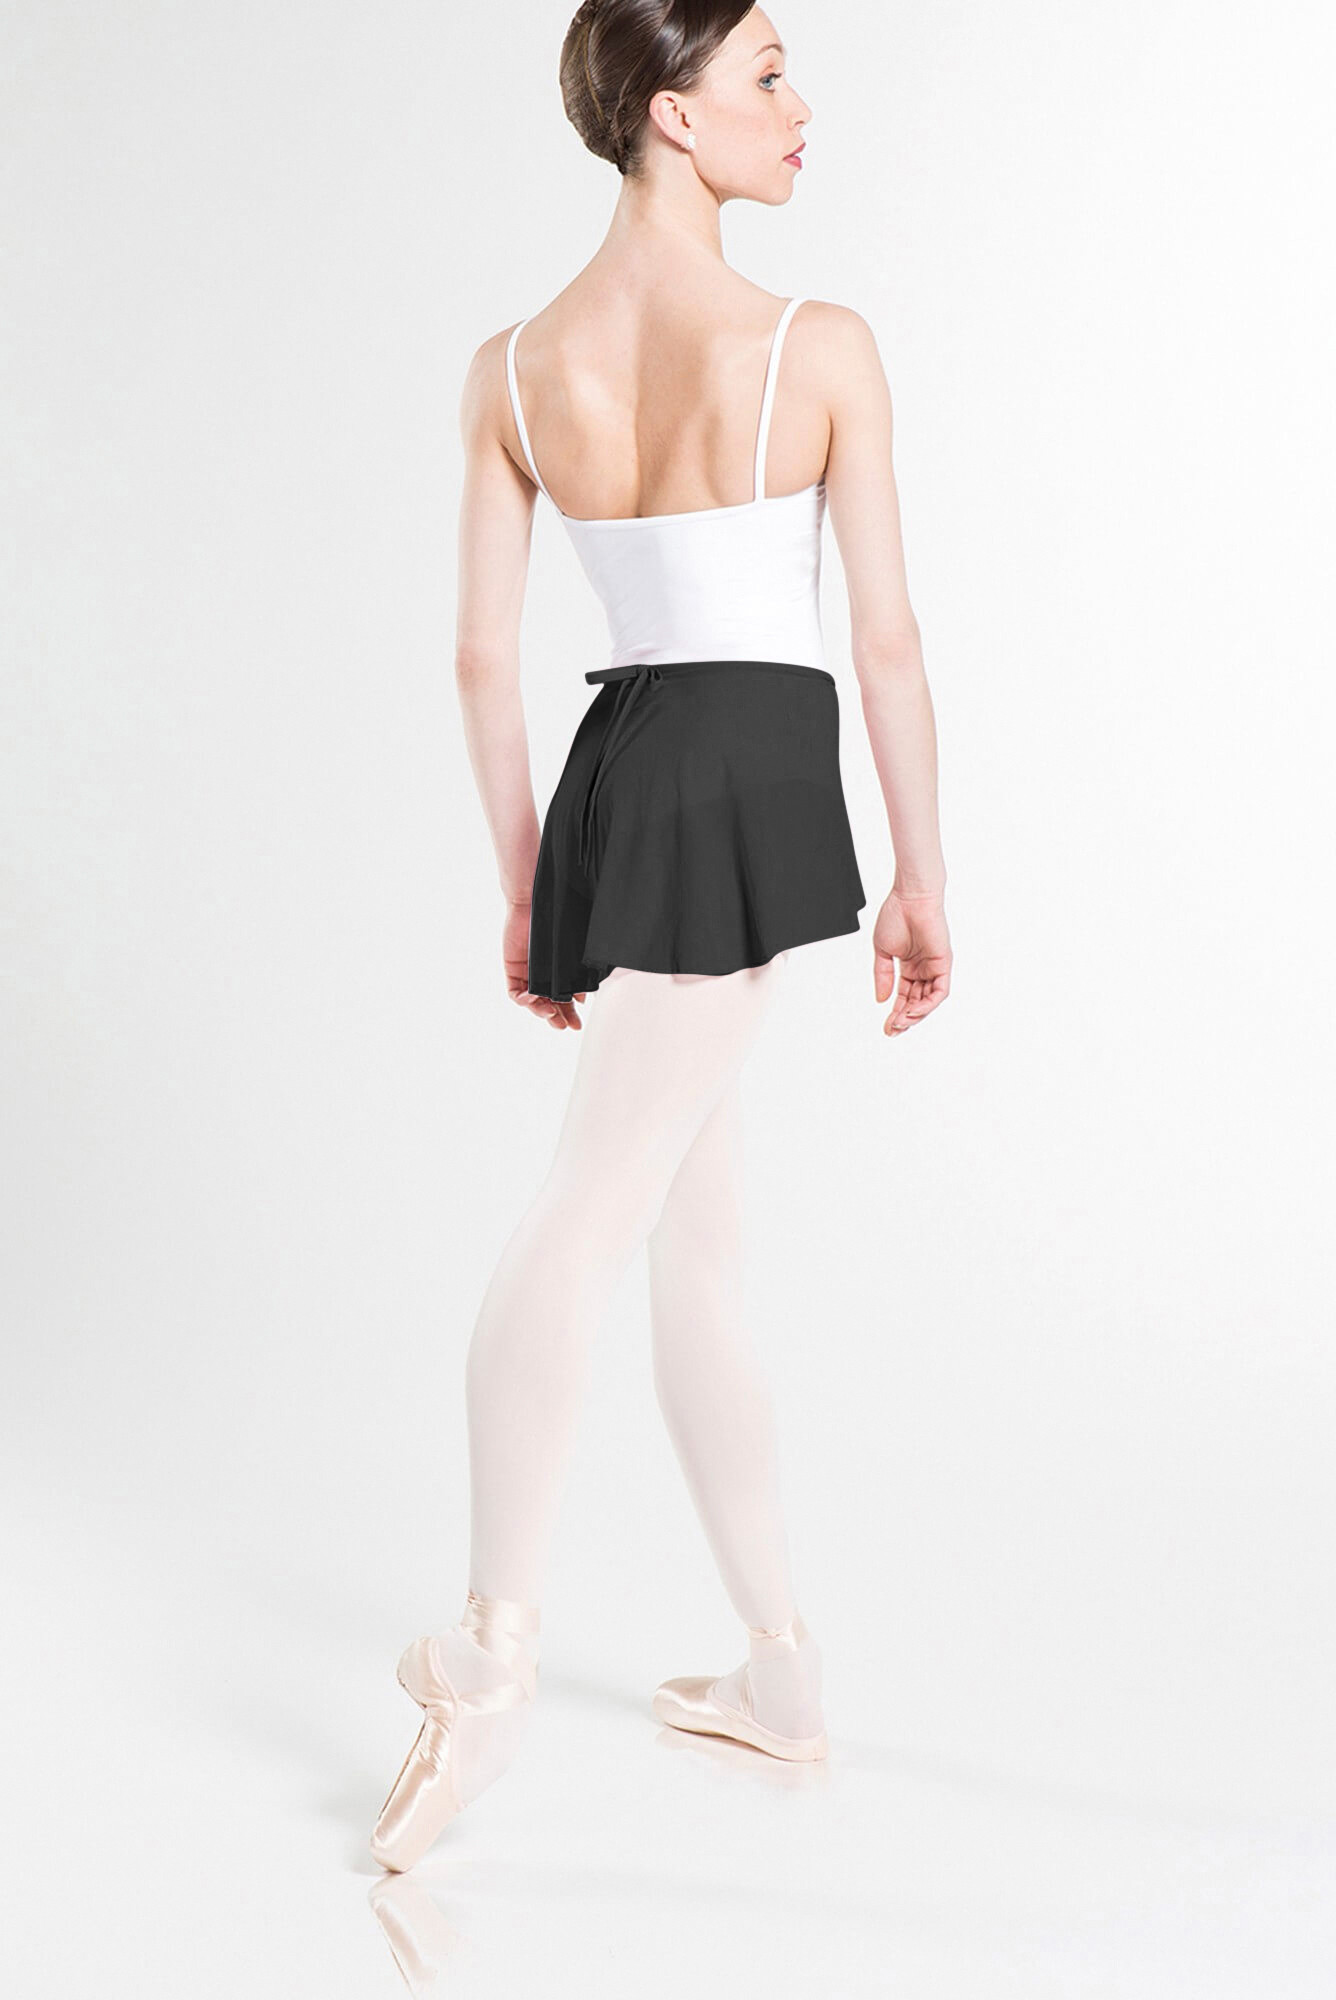 A Dancer's Guide: Finding the Right Skirt — A Dancer's Life